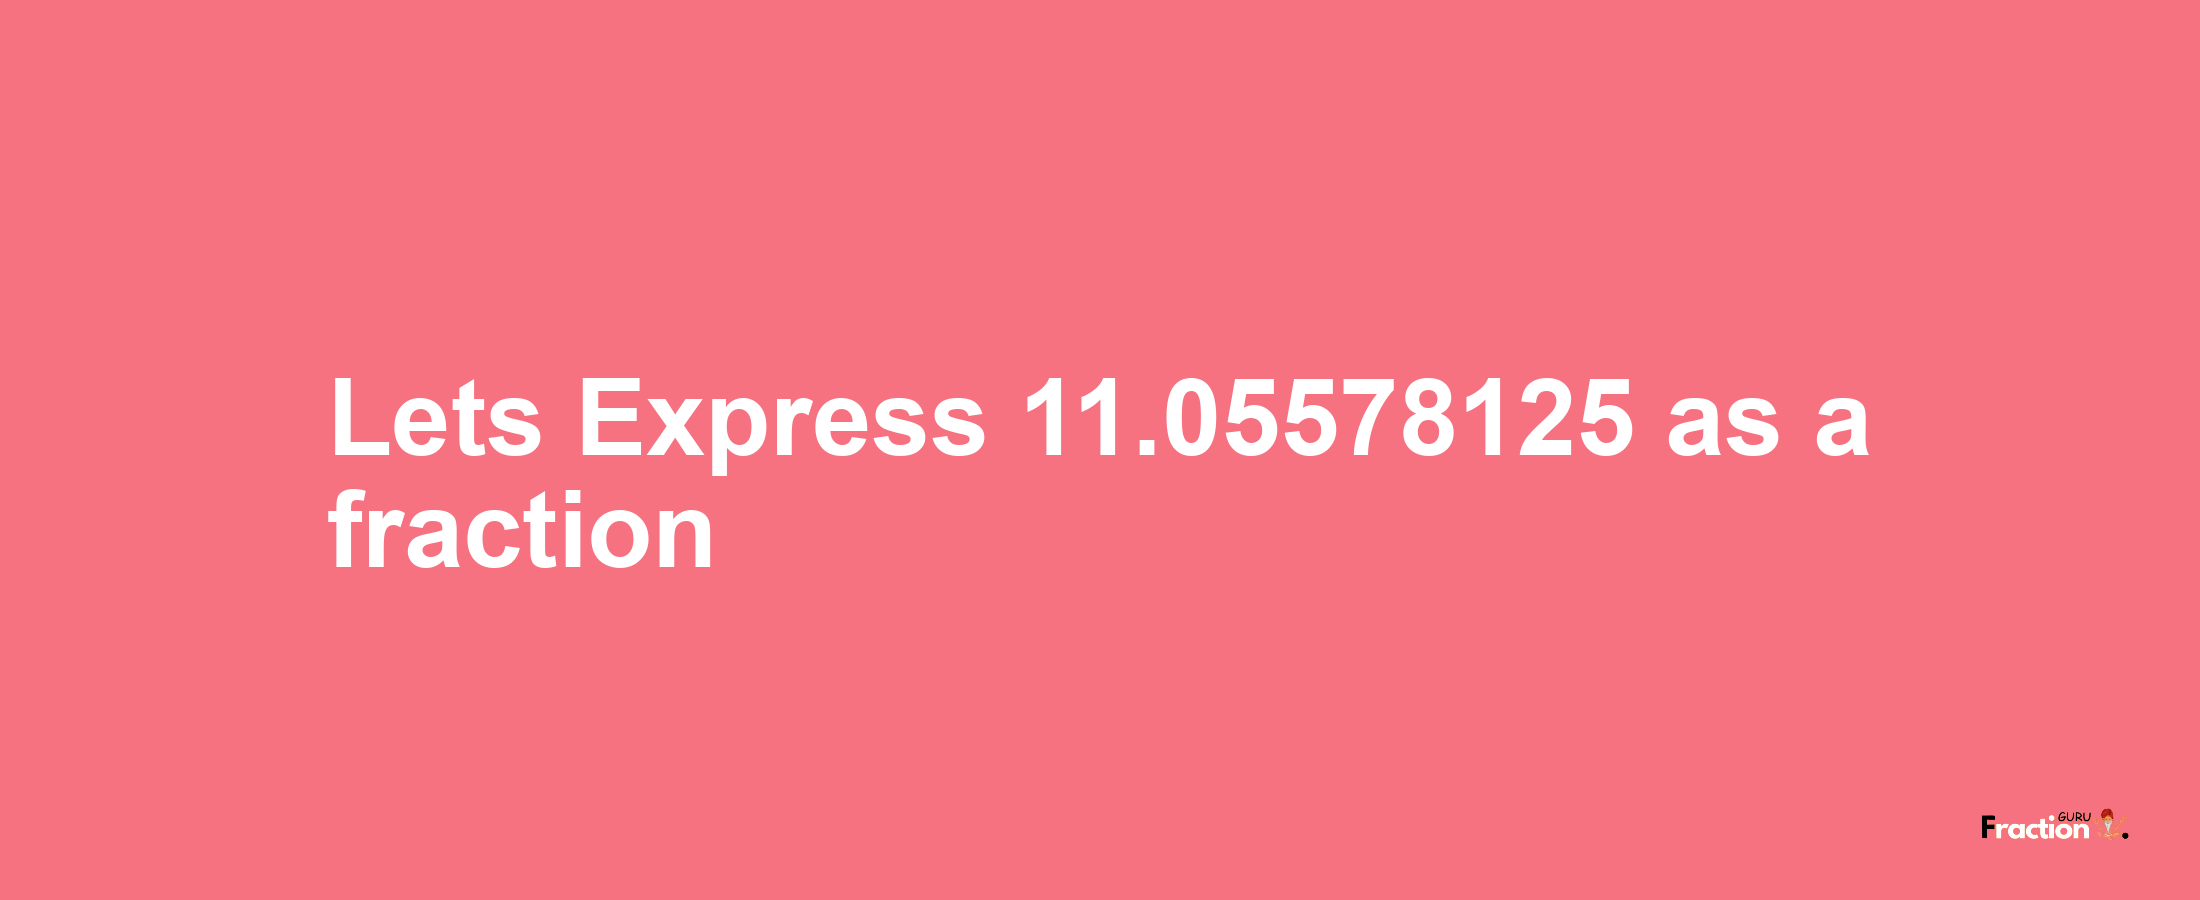 Lets Express 11.05578125 as afraction